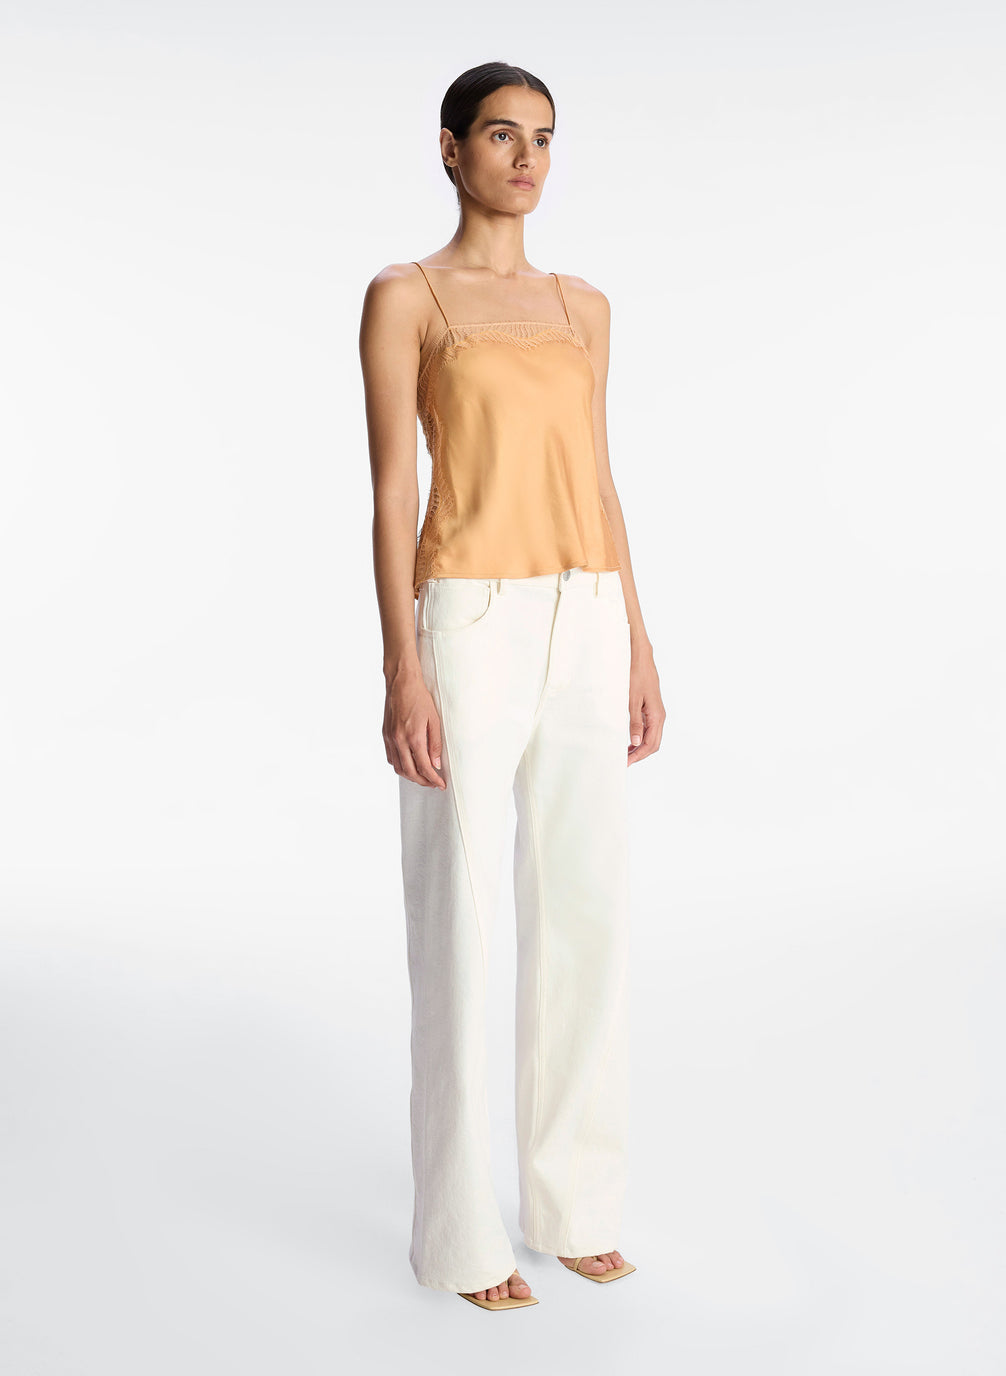 side view of woman wearing tan lace trim camisole and white pants